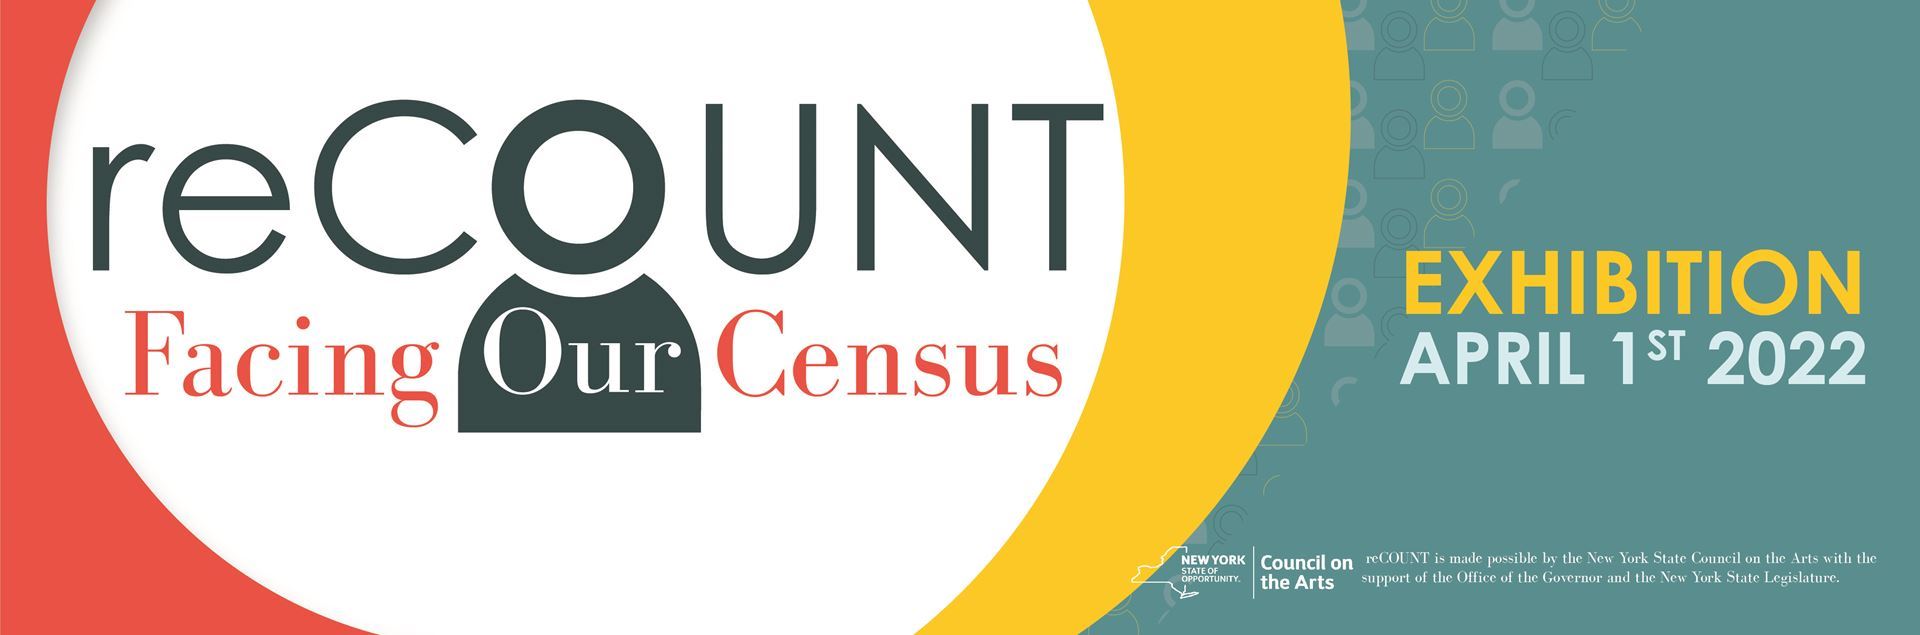 Rectangular area with three colored areas. White area reads “reCOUNT Facing our Census”, followed by a blank yellow area, and the blue area reads “Exhibition April 1st 2022” with acknowledgements.